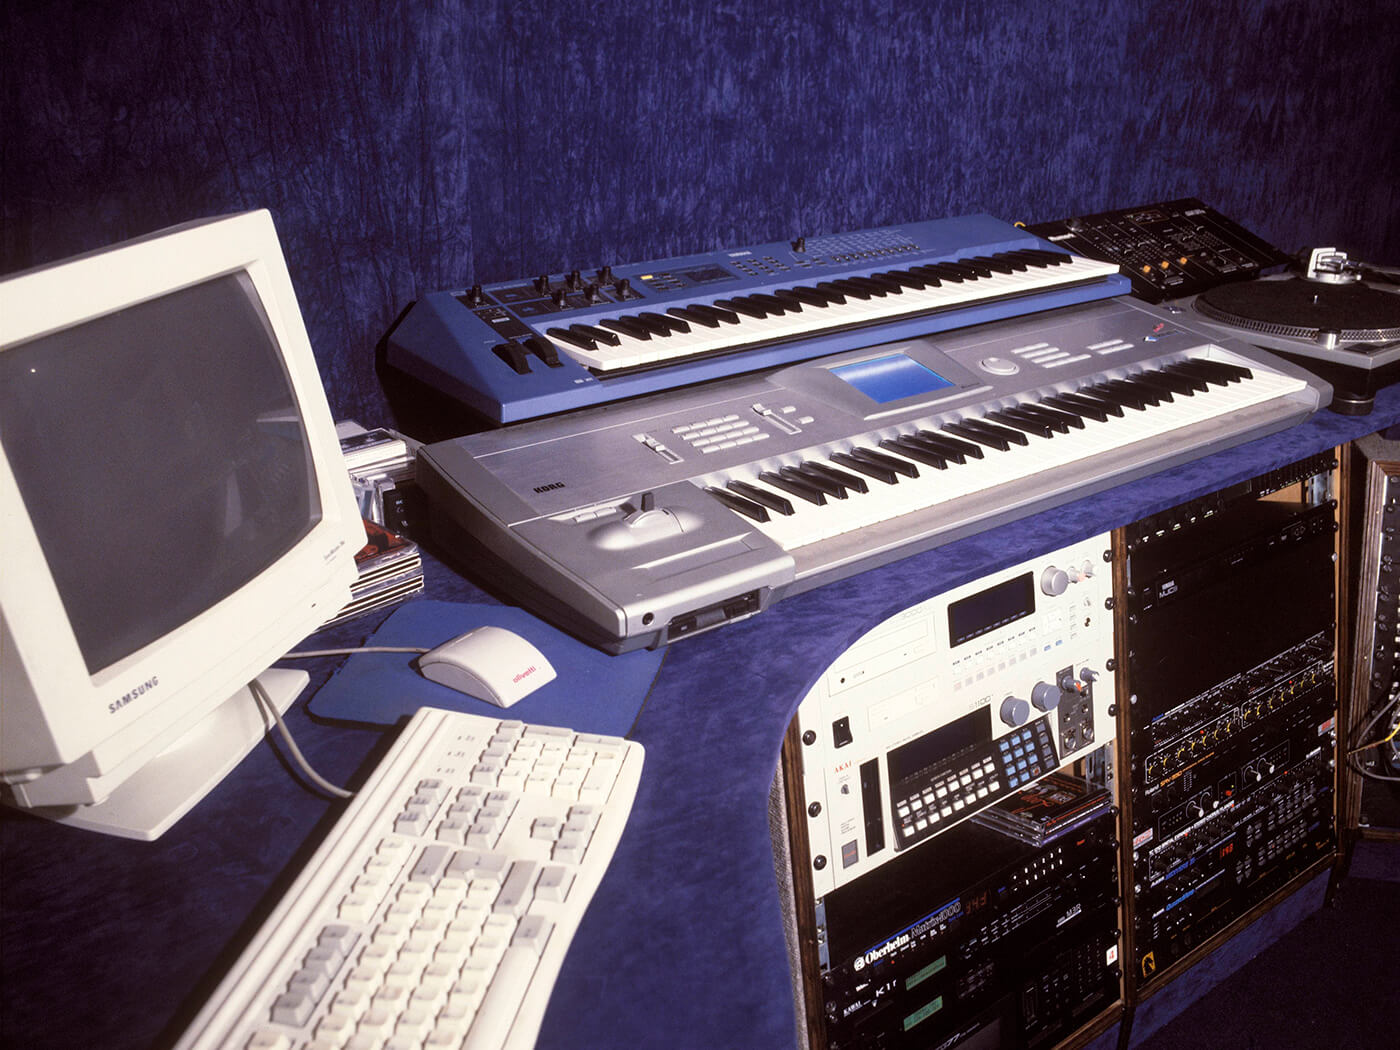 How the computer became the ultimate synth